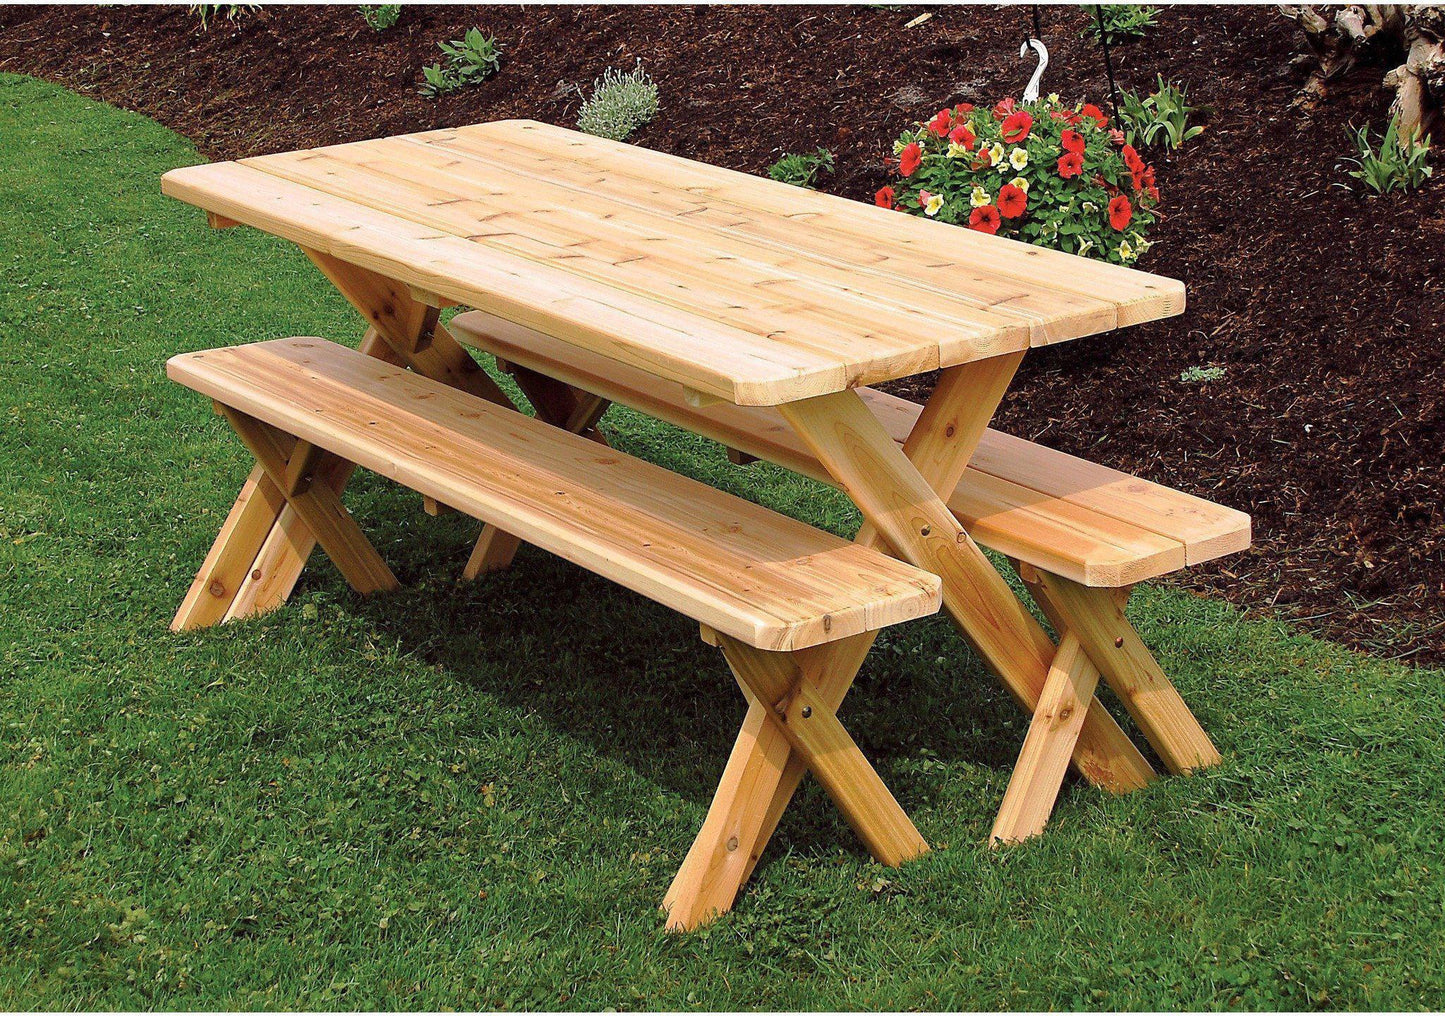 A & L FURNITURE CO. Western Red Cedar 5' Cross-leg Table w/2 Benches - Specify for FREE 2" Umbrella Hole  - Ships FREE in 5-7 Business days - Rocking Furniture